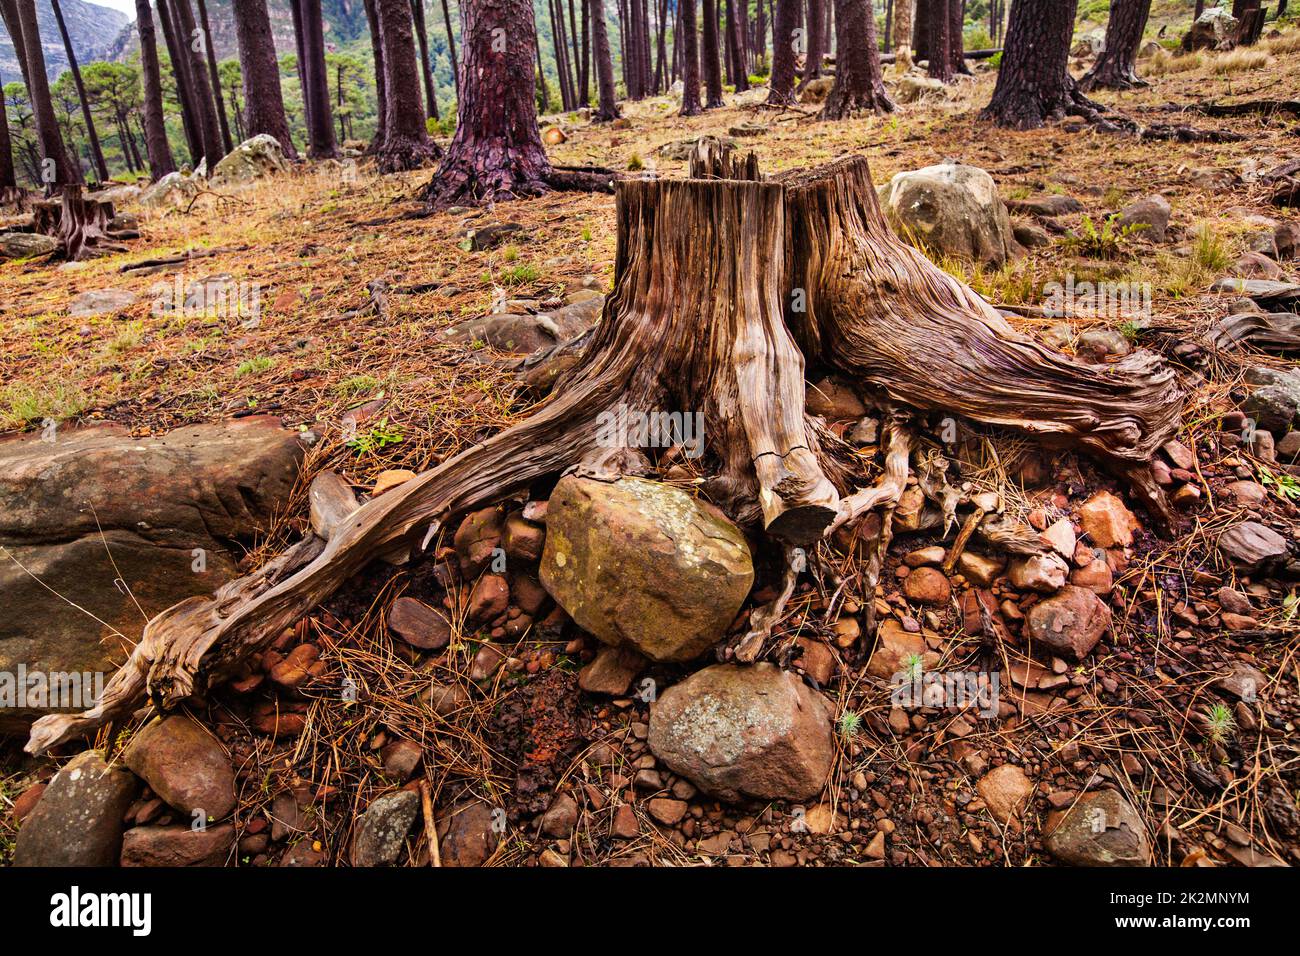 Focus on deforestation. Shot of a cut down tree in the forest. Stock Photo